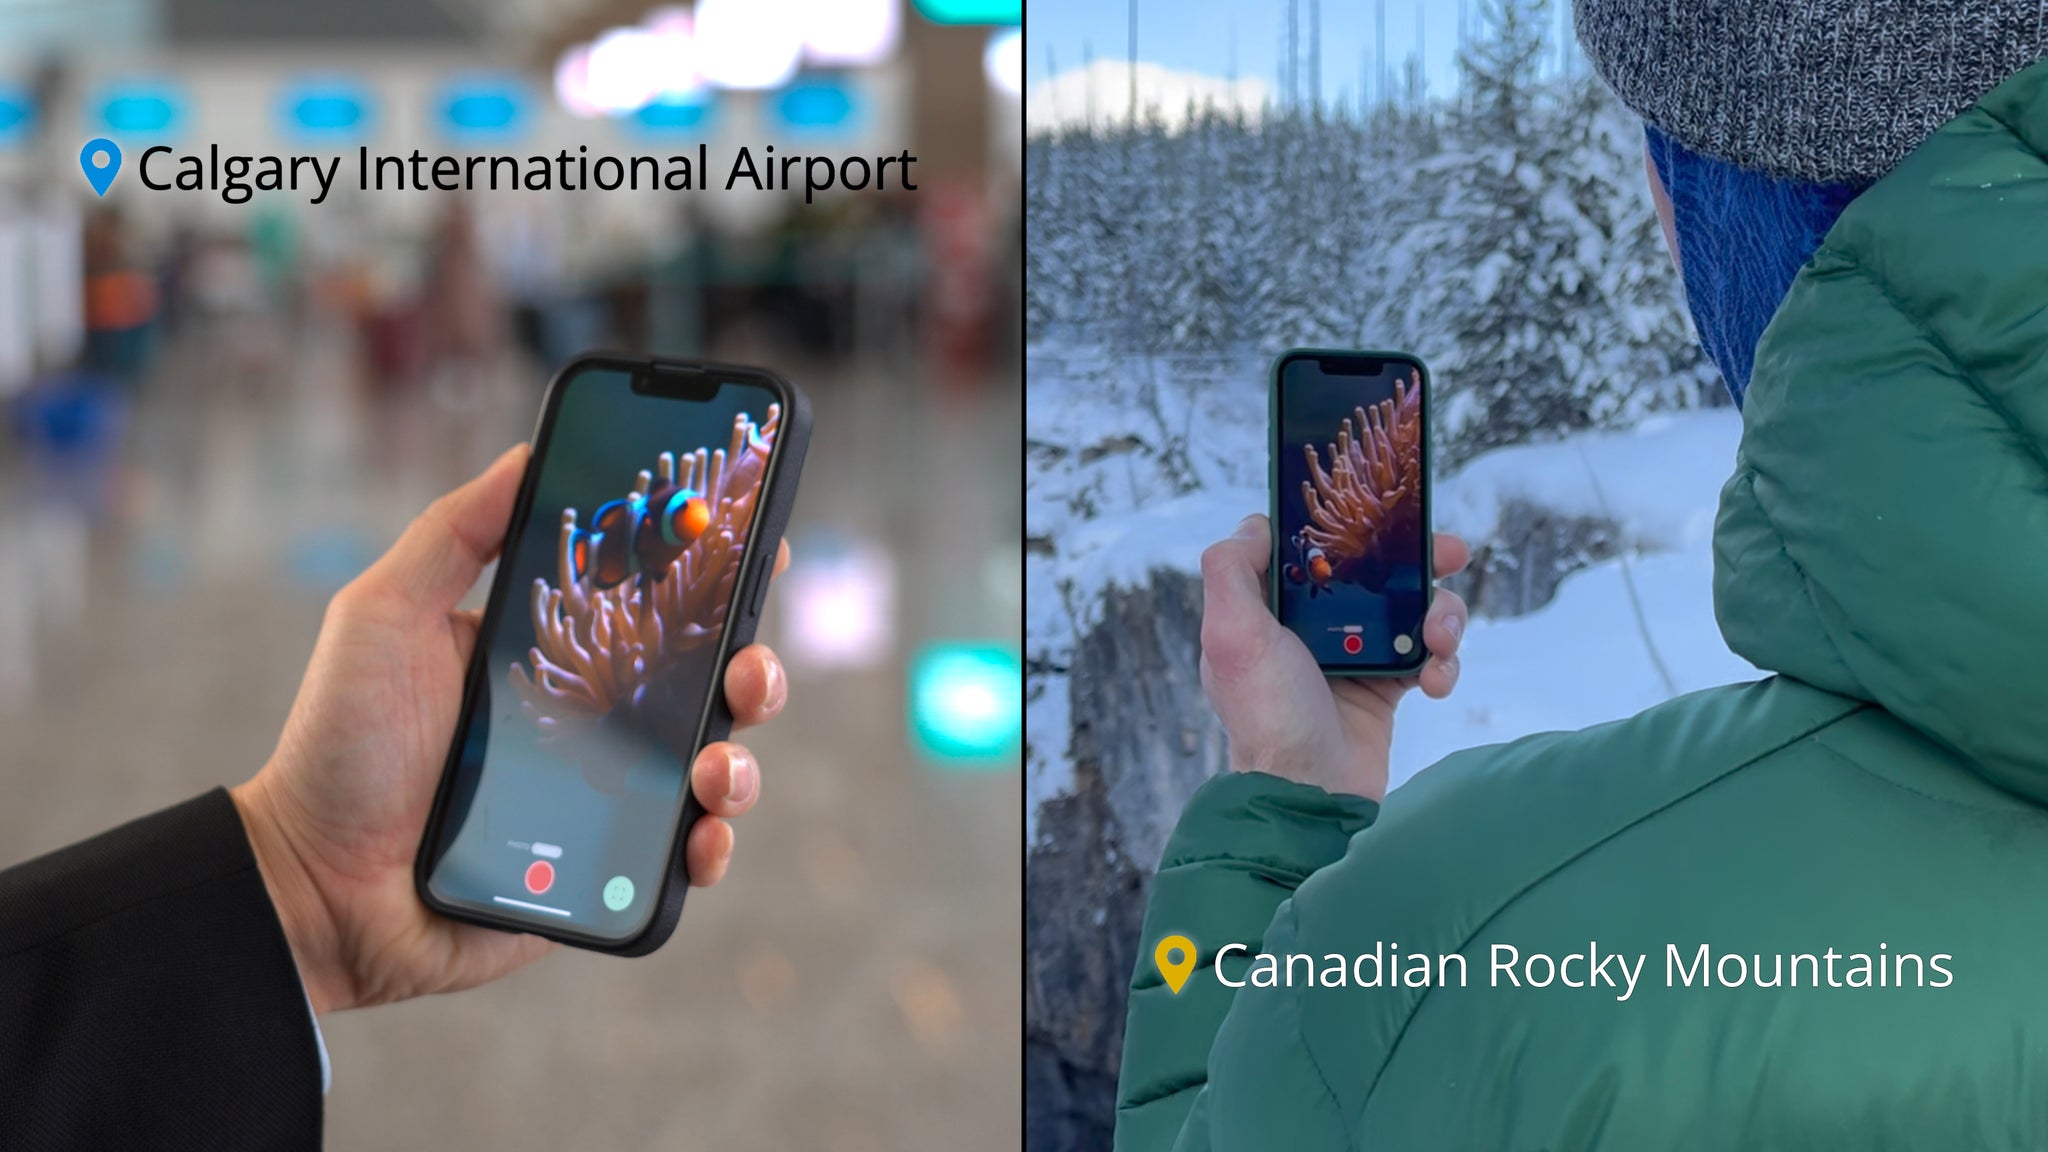 2 locations are shown: The Calgary International Airport and a snowy scape in the Canadian Rocky Mountains. The Felix Smart application, displayed on a phone being held by a man's hand, is live-streaming a clownfish and anemone in both locations.